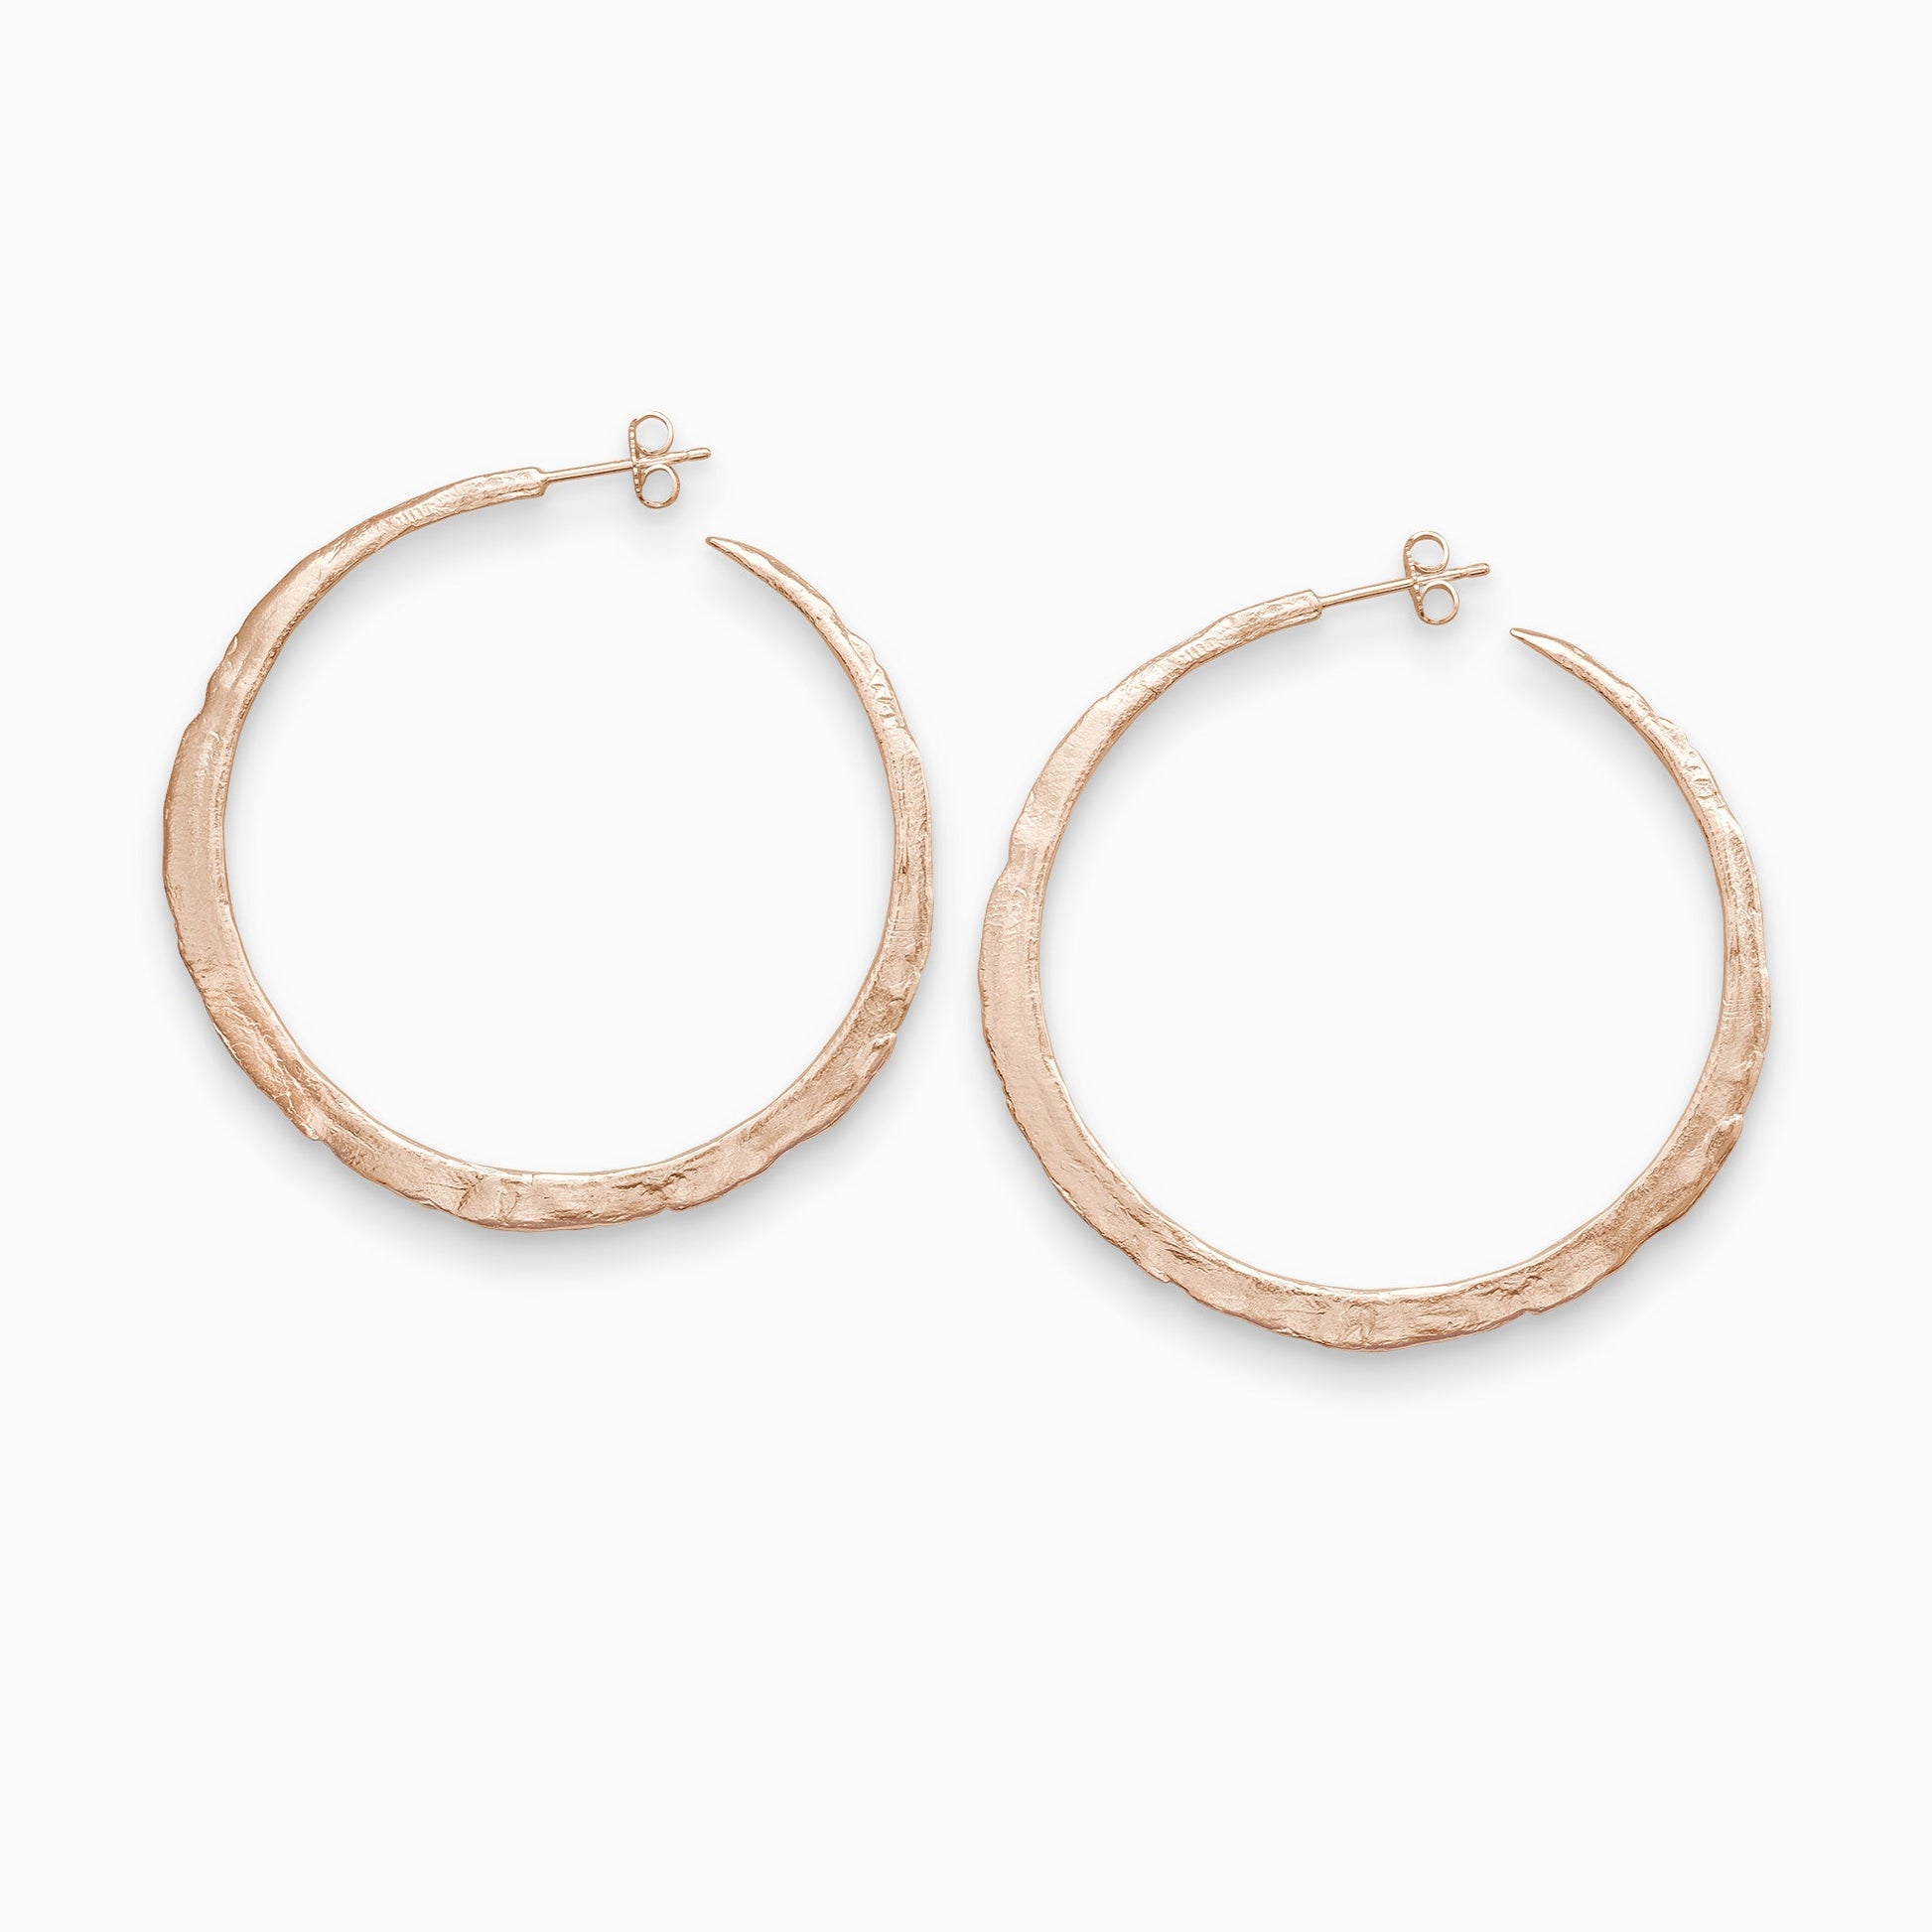 A pair of 18ct Fairtrade rose gold  round hoop earrings with a stud fastening. Organic texture and and tapering from bottom centre to the top. 55mm outside diameter.